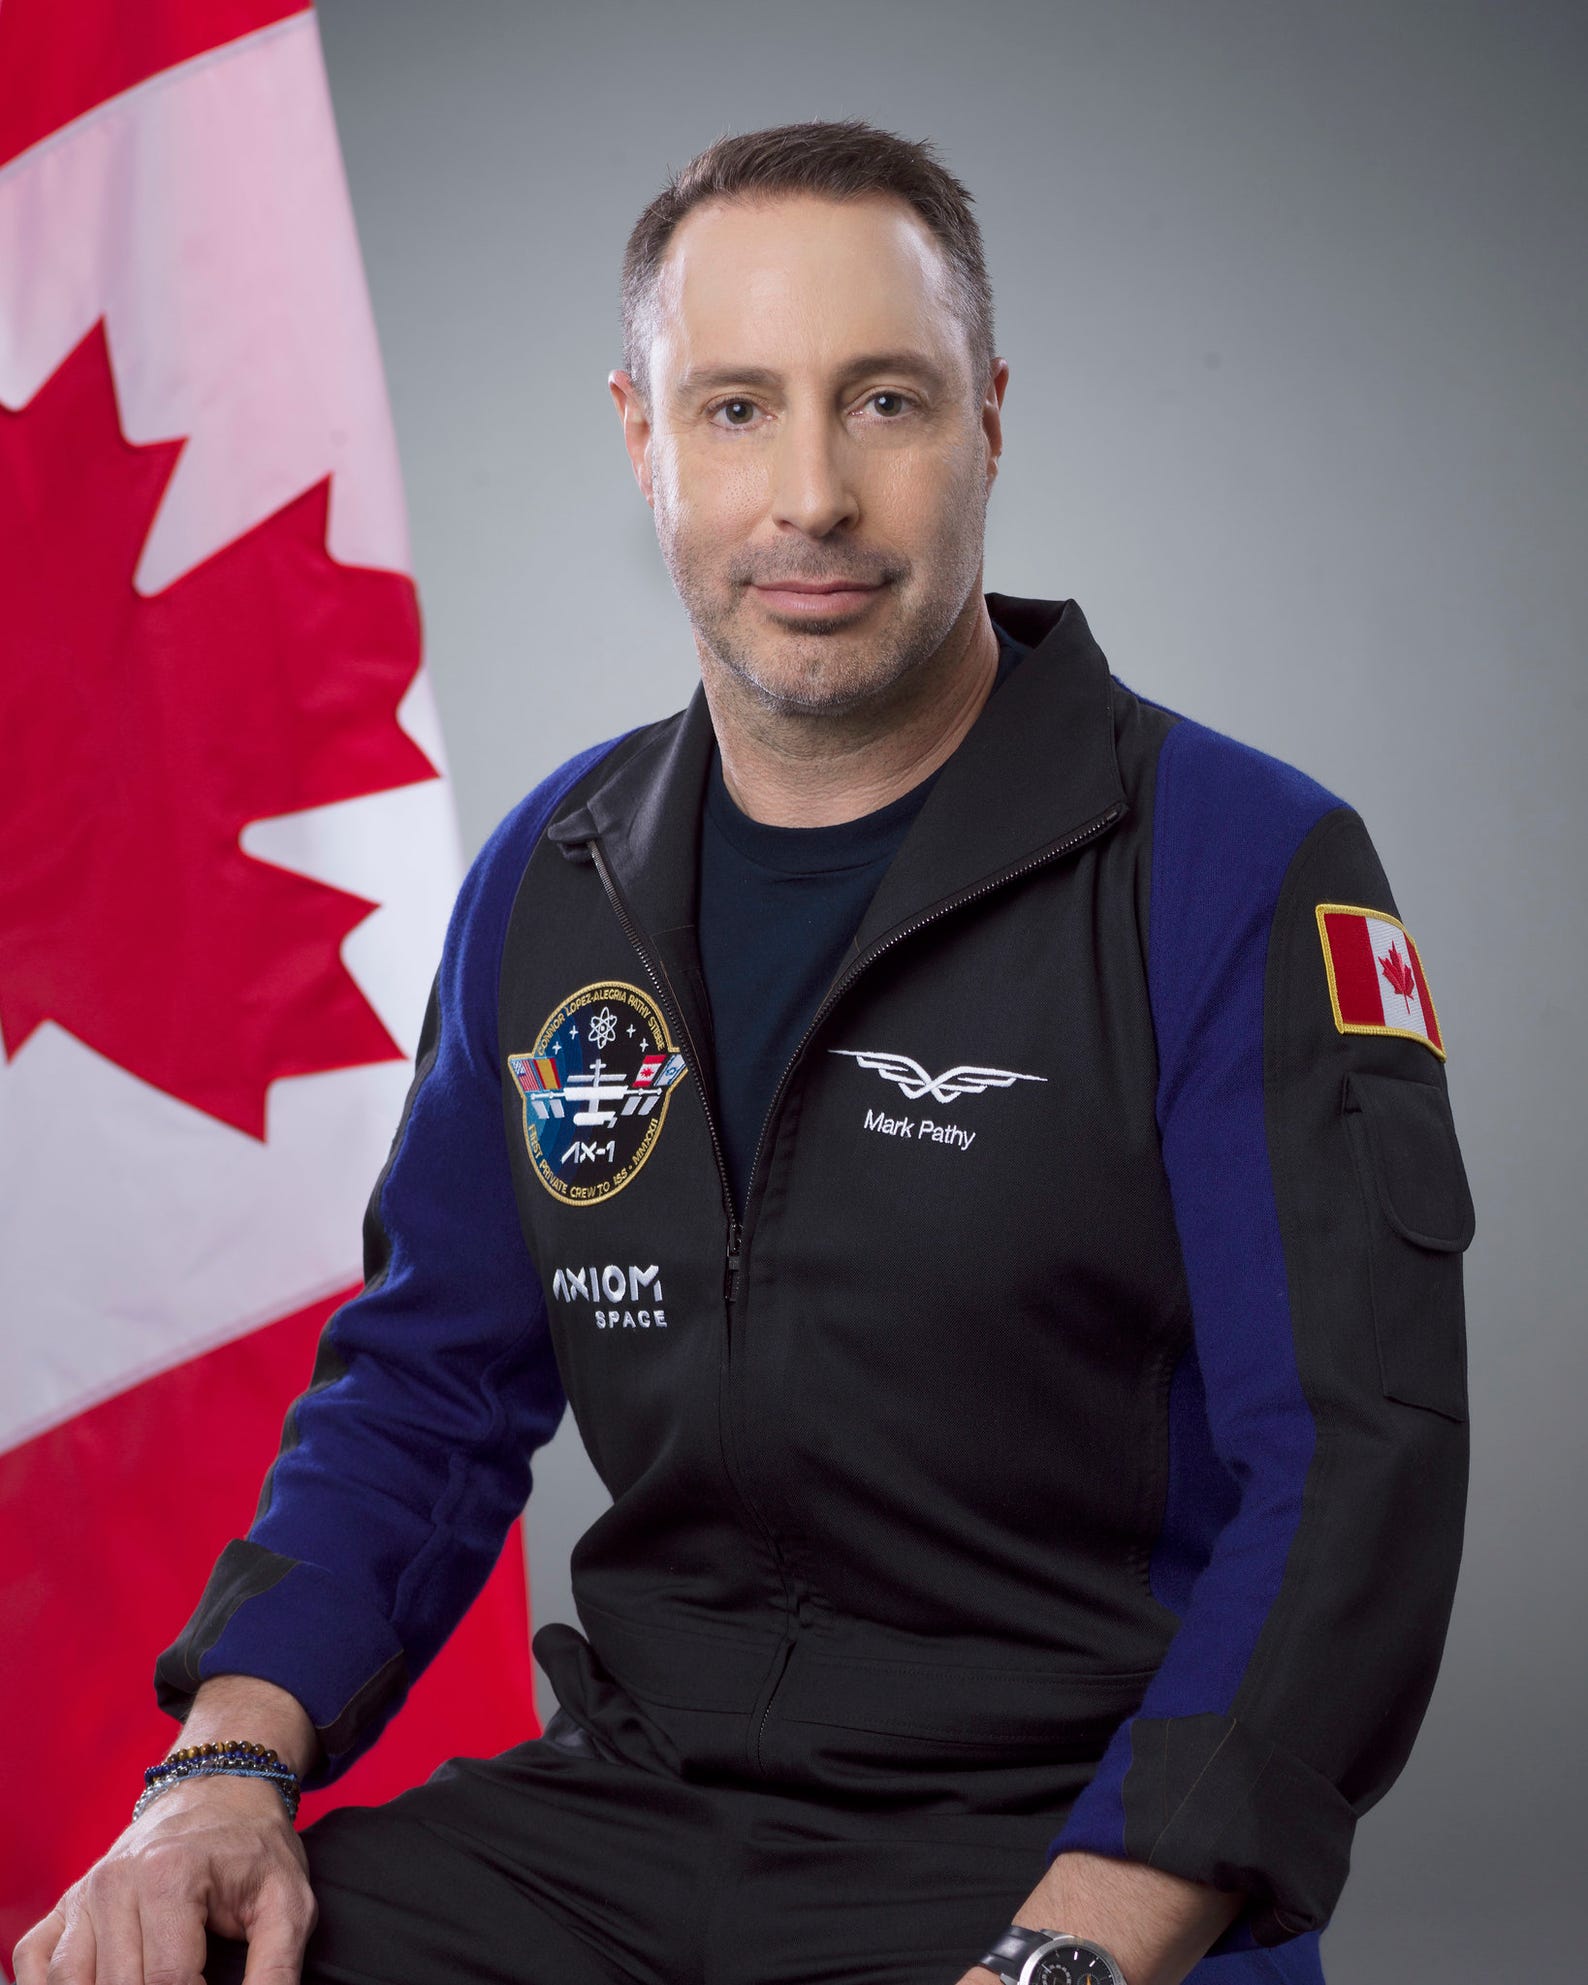 Axiom Space Ax-1 Mission Specialist, Mark Pathy, a wealthy investment firm CEO and philanthropist, will represent the country of Canada on the first, all-private mission to the International Space Station.